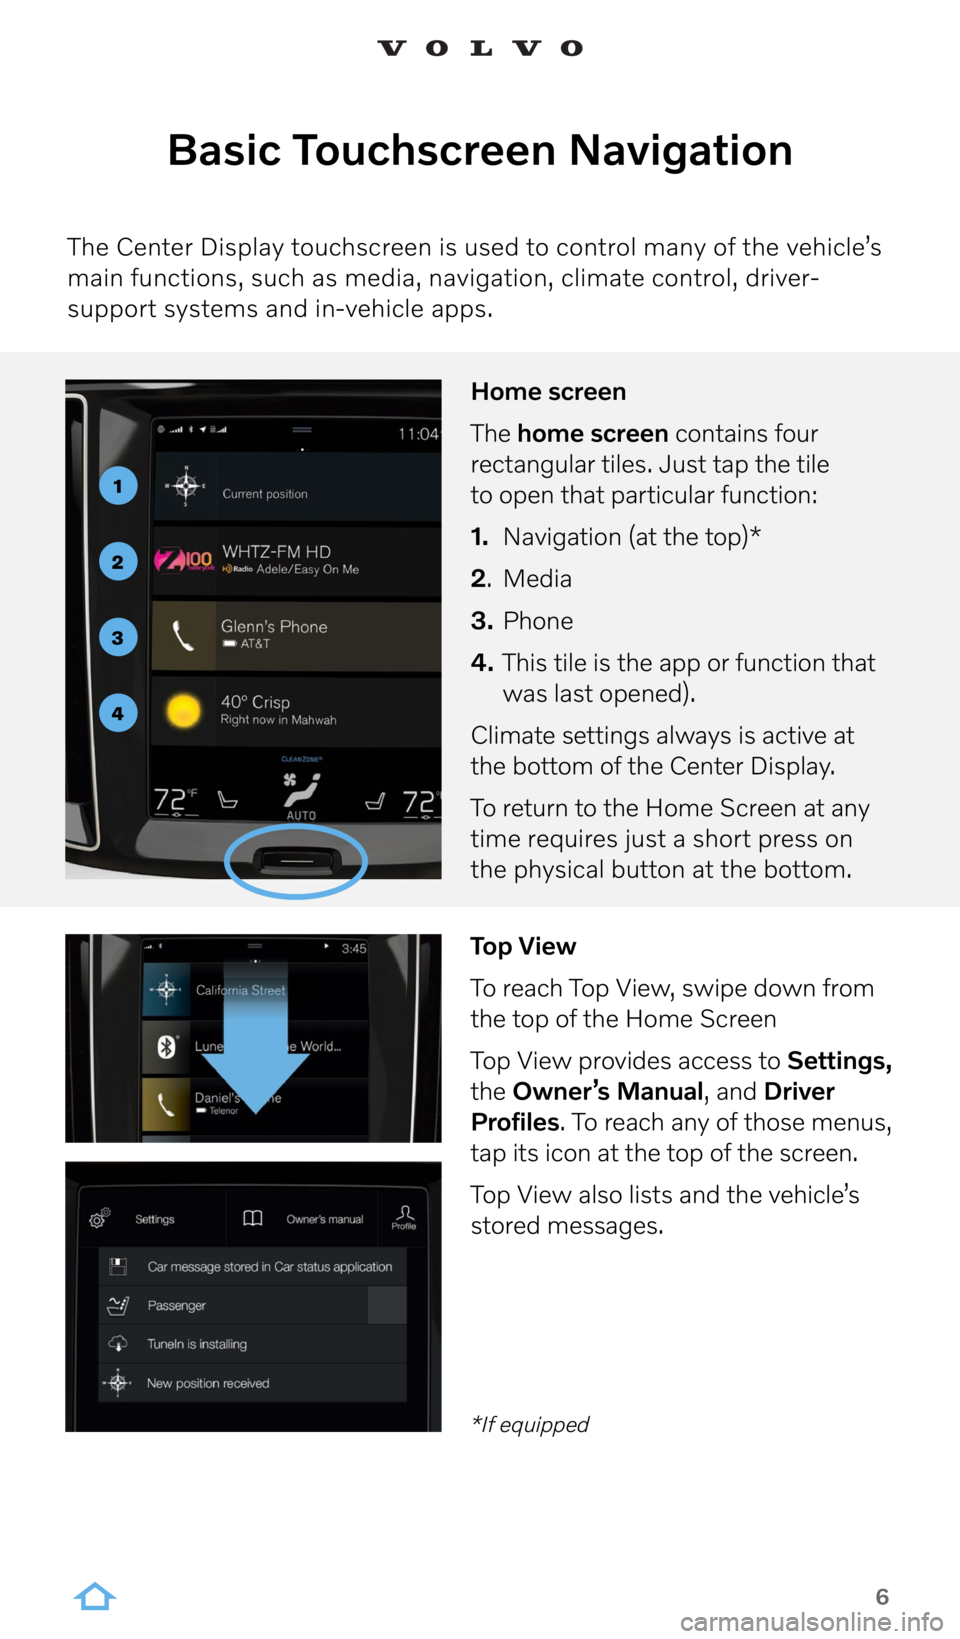 VOLVO V60 RECHARGE 2022  Sensus Digital Guide 6
Basic Touchscreen Navigation
The Center Display touchscreen is used to control many of the vehicle’s 
main functions, such as media, navigation, climate control, driver-
support systems and in-veh